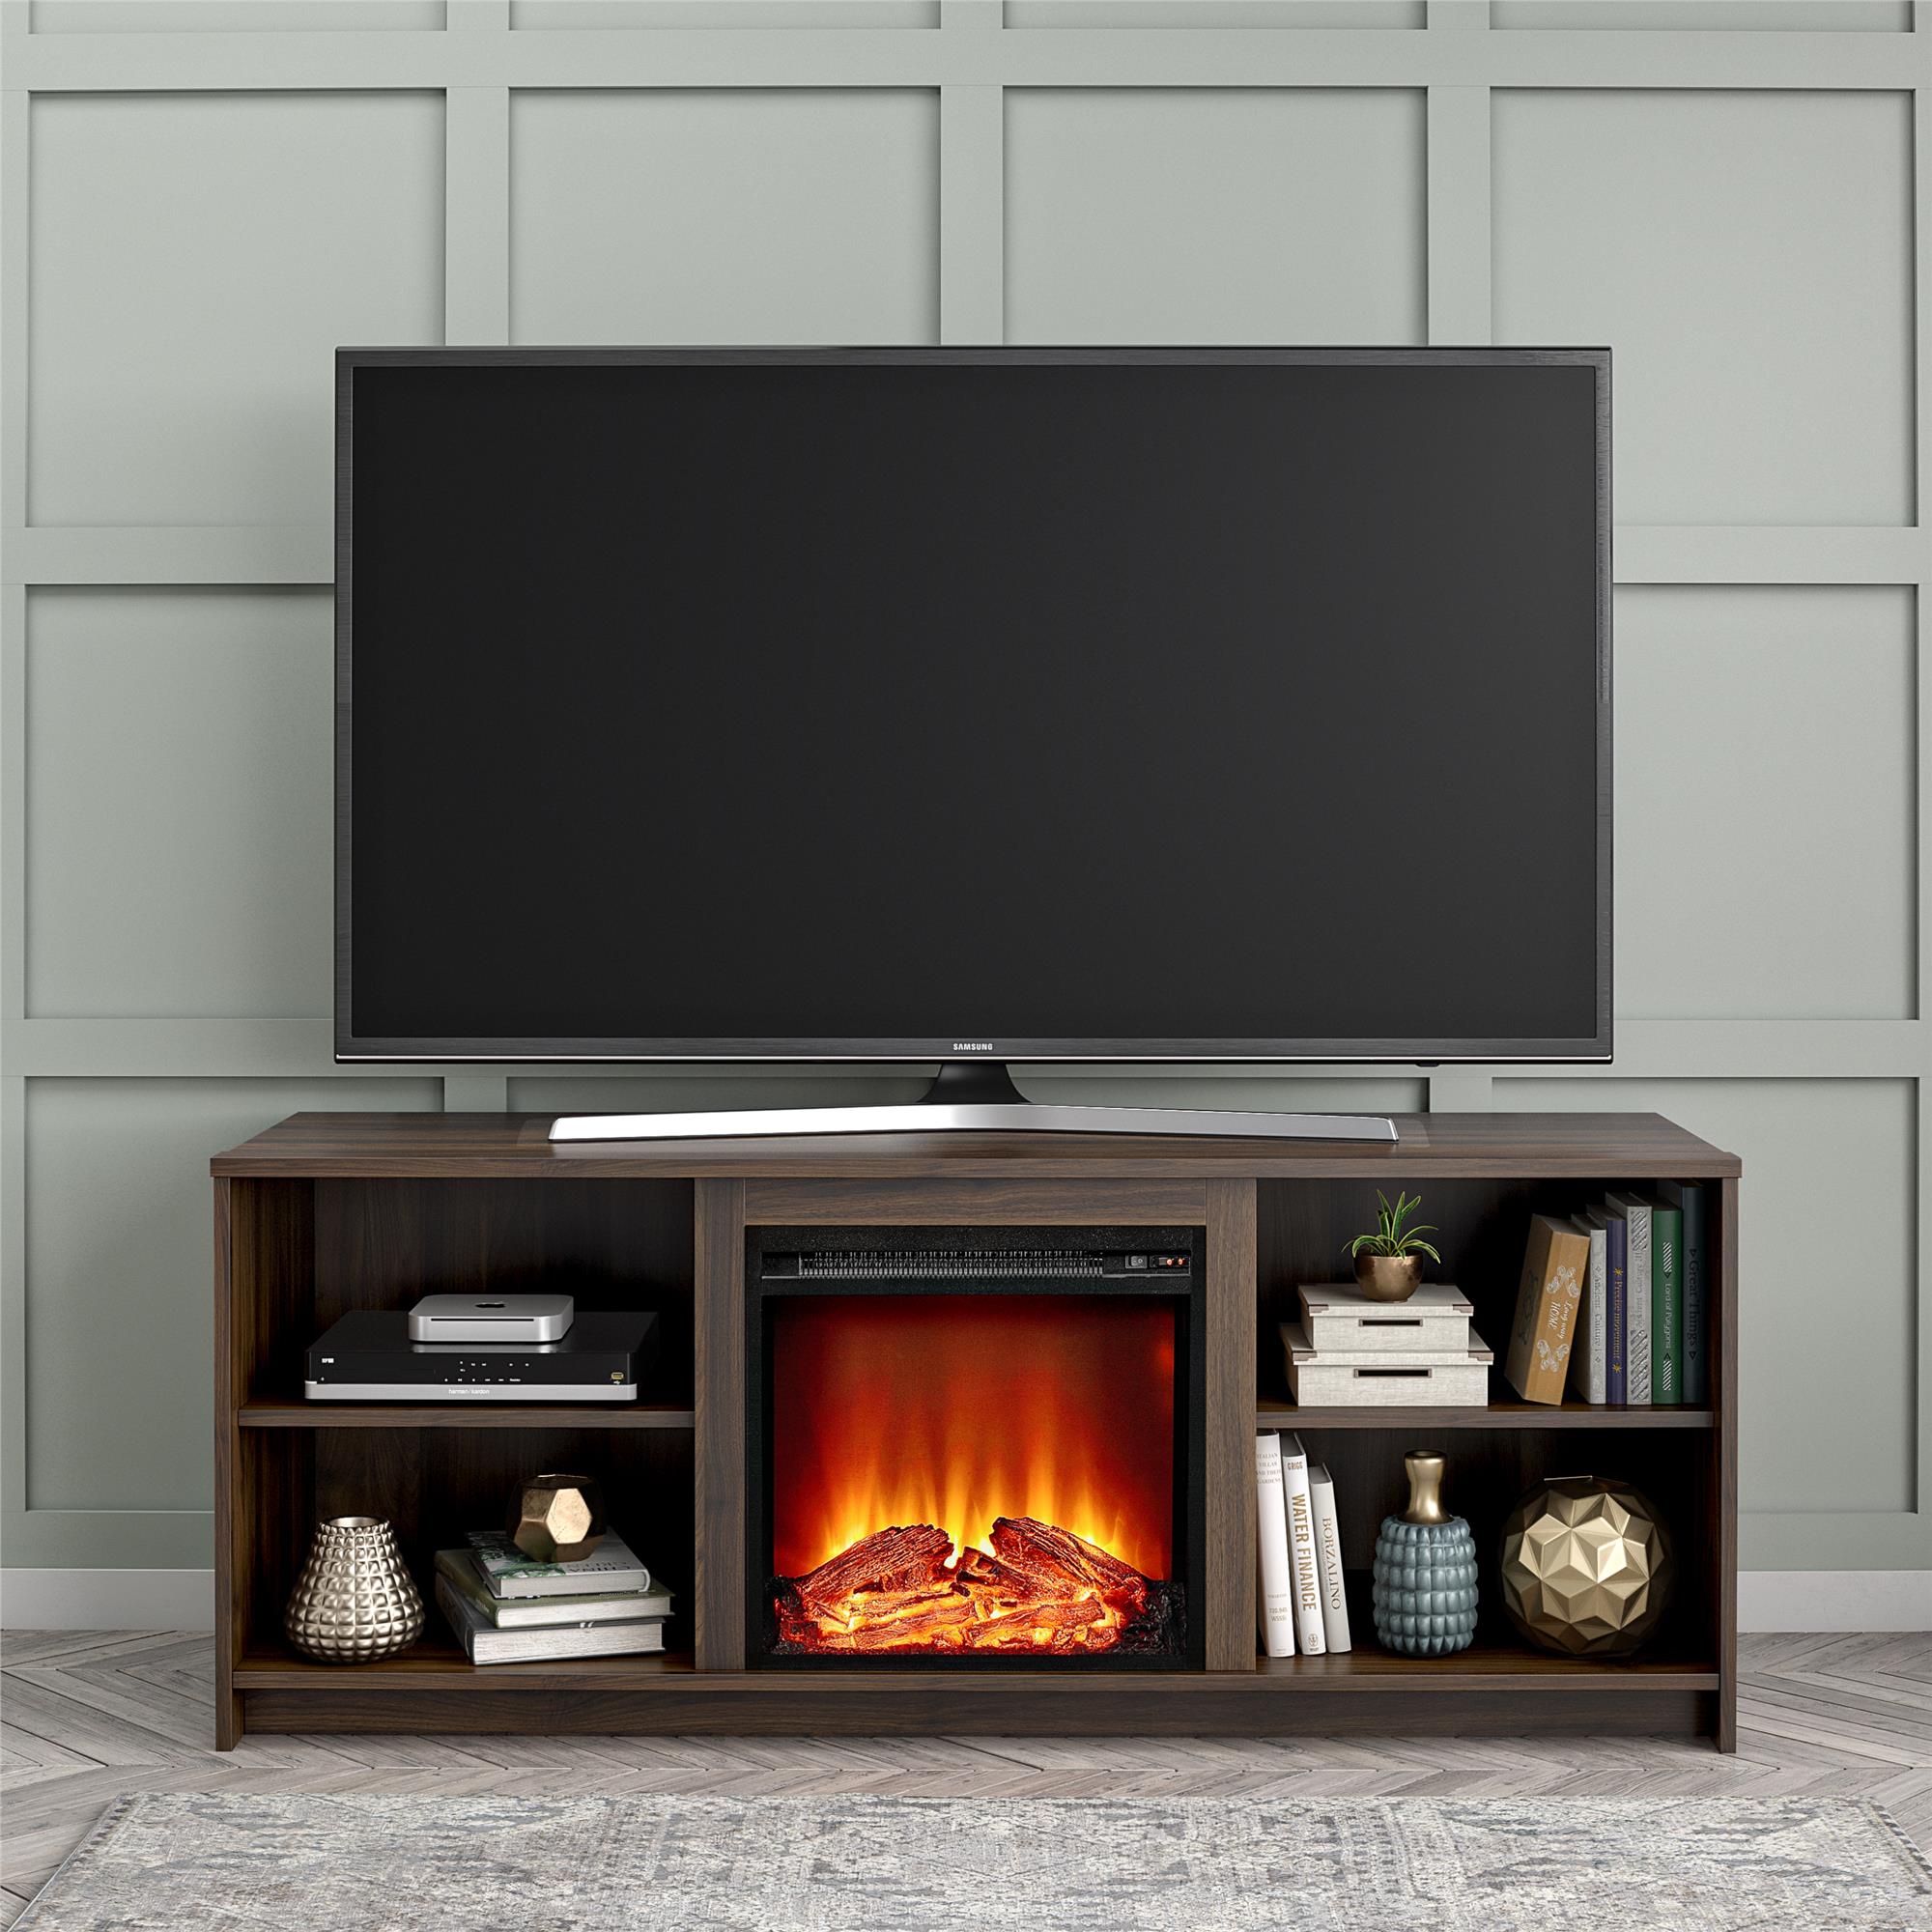 Mainstays Fireplace TV Stand for TVs up to 65", Walnut - image 1 of 11